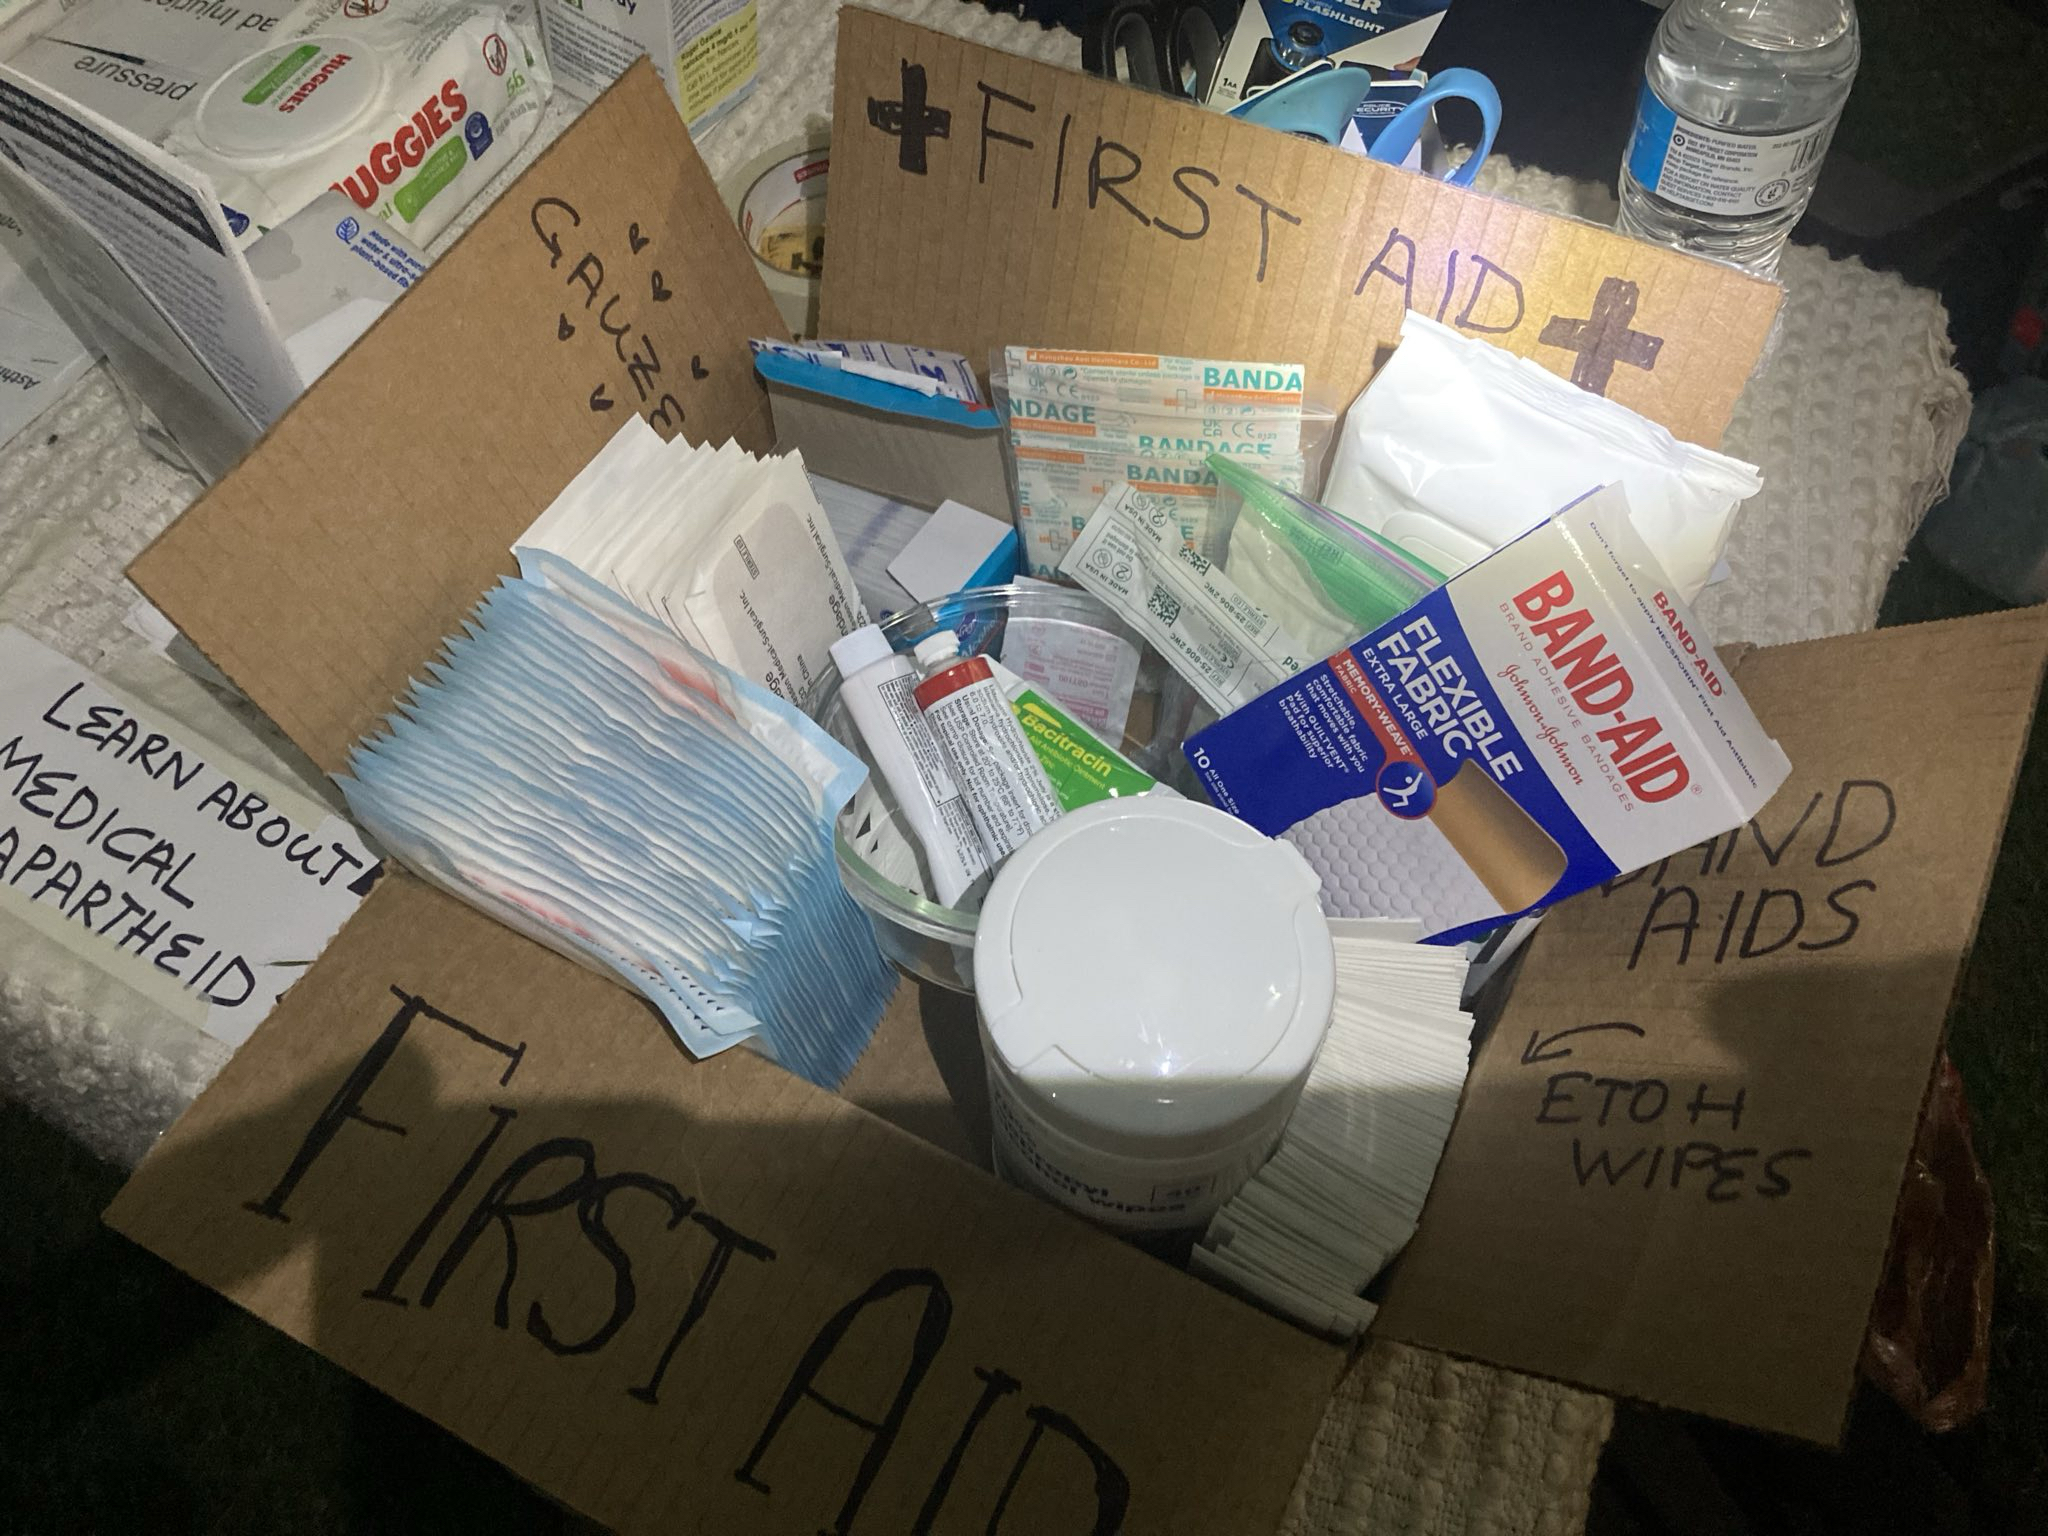 A photo of a cardboard box with first aid supplies.